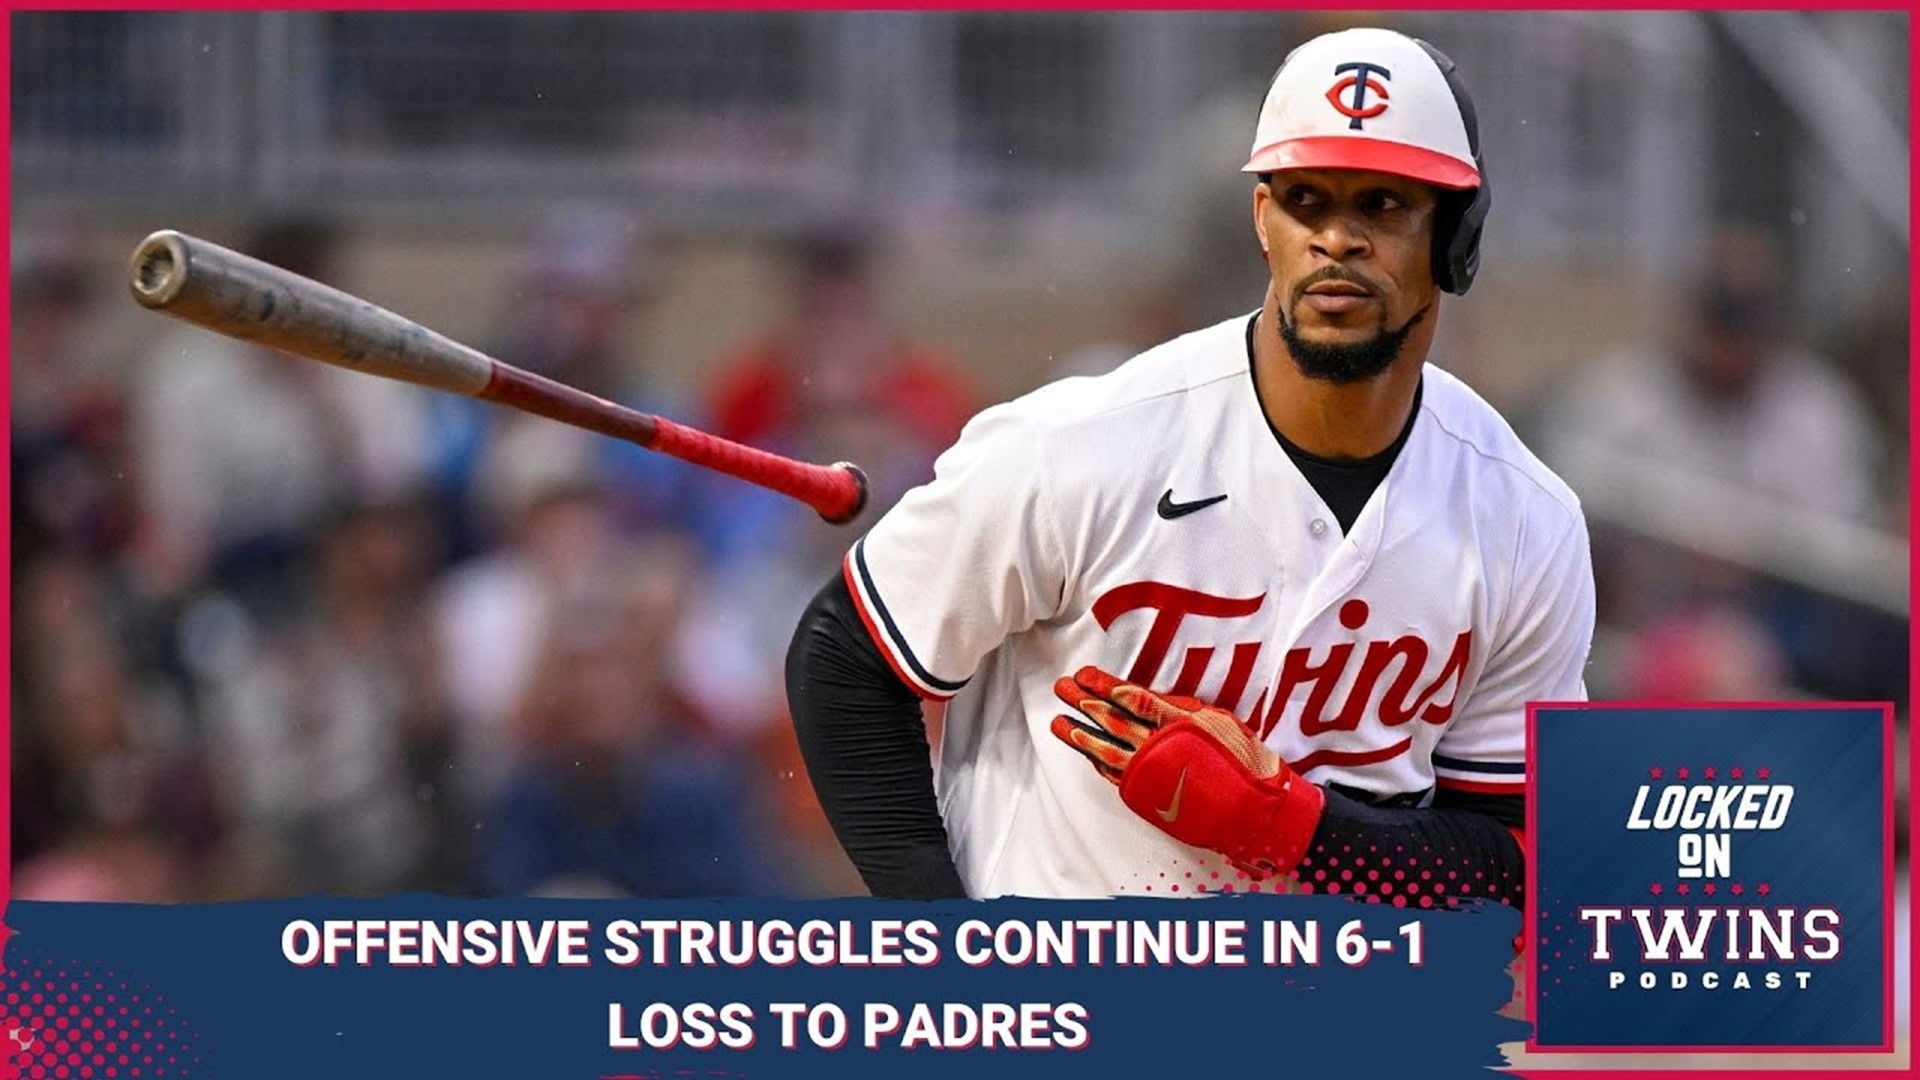 The top four hitters in the Twins lineup were 0-for-14 and the team on the whole stranded 10 runners in a 6-1 loss to the Padres.